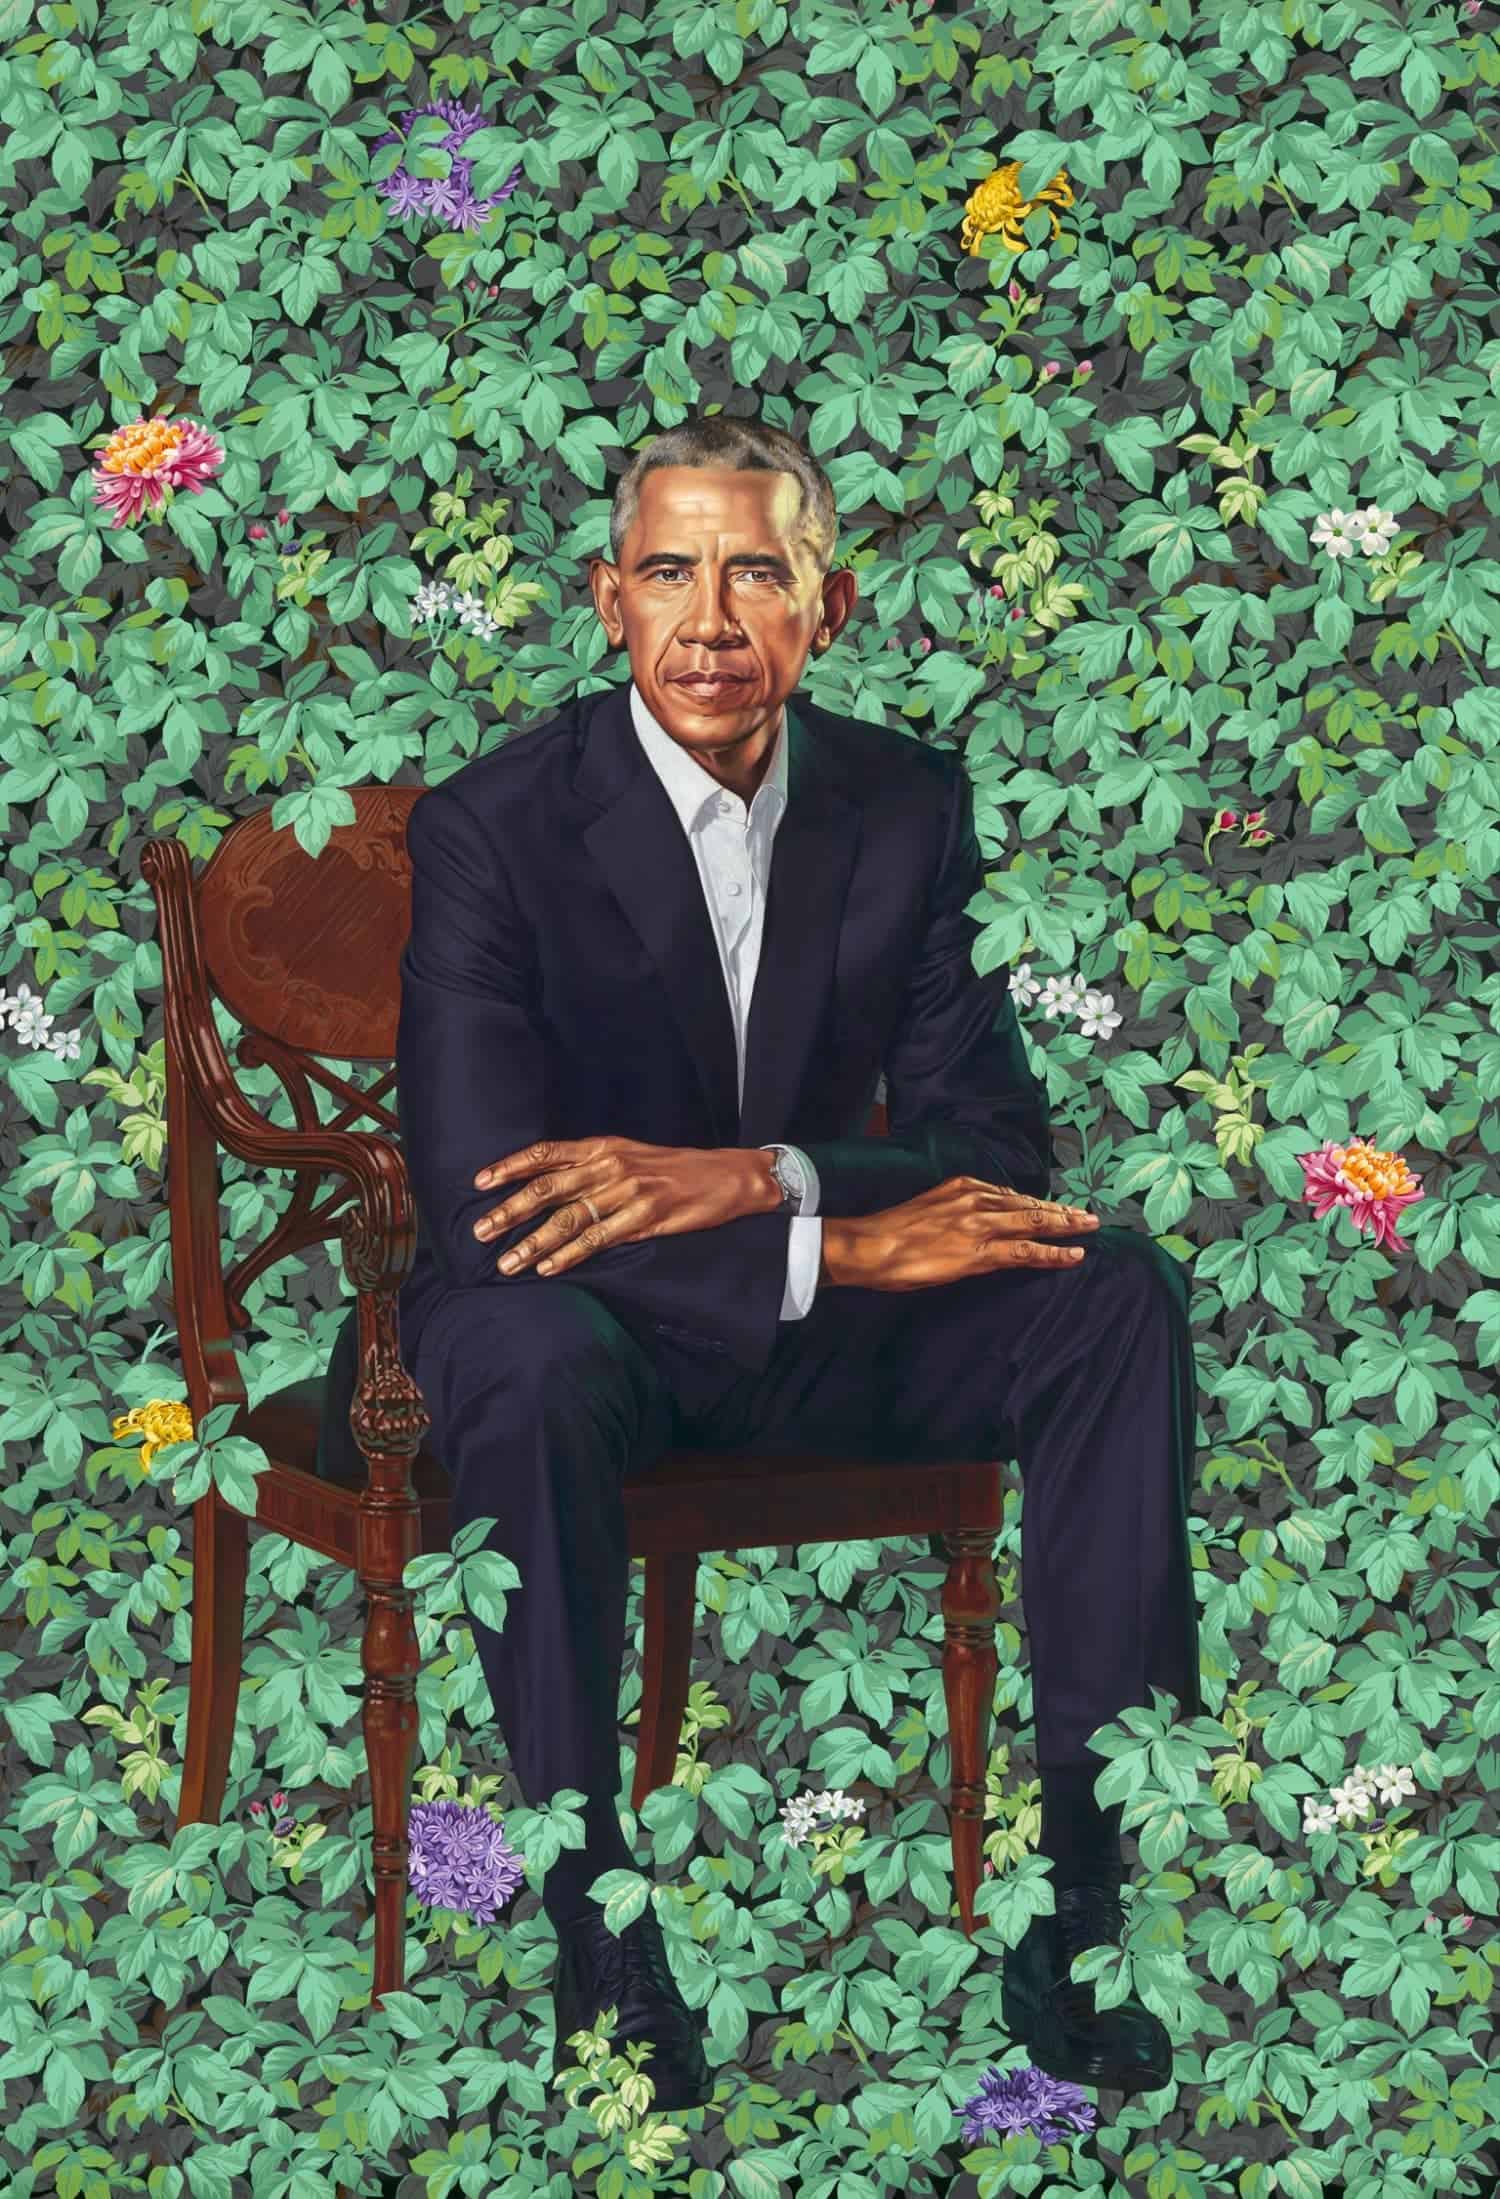 Barack Obama by Kehinde Wiley, oil on canvas, 2018. Courtesy National Portrait Gallery, Smithsonian Institution.